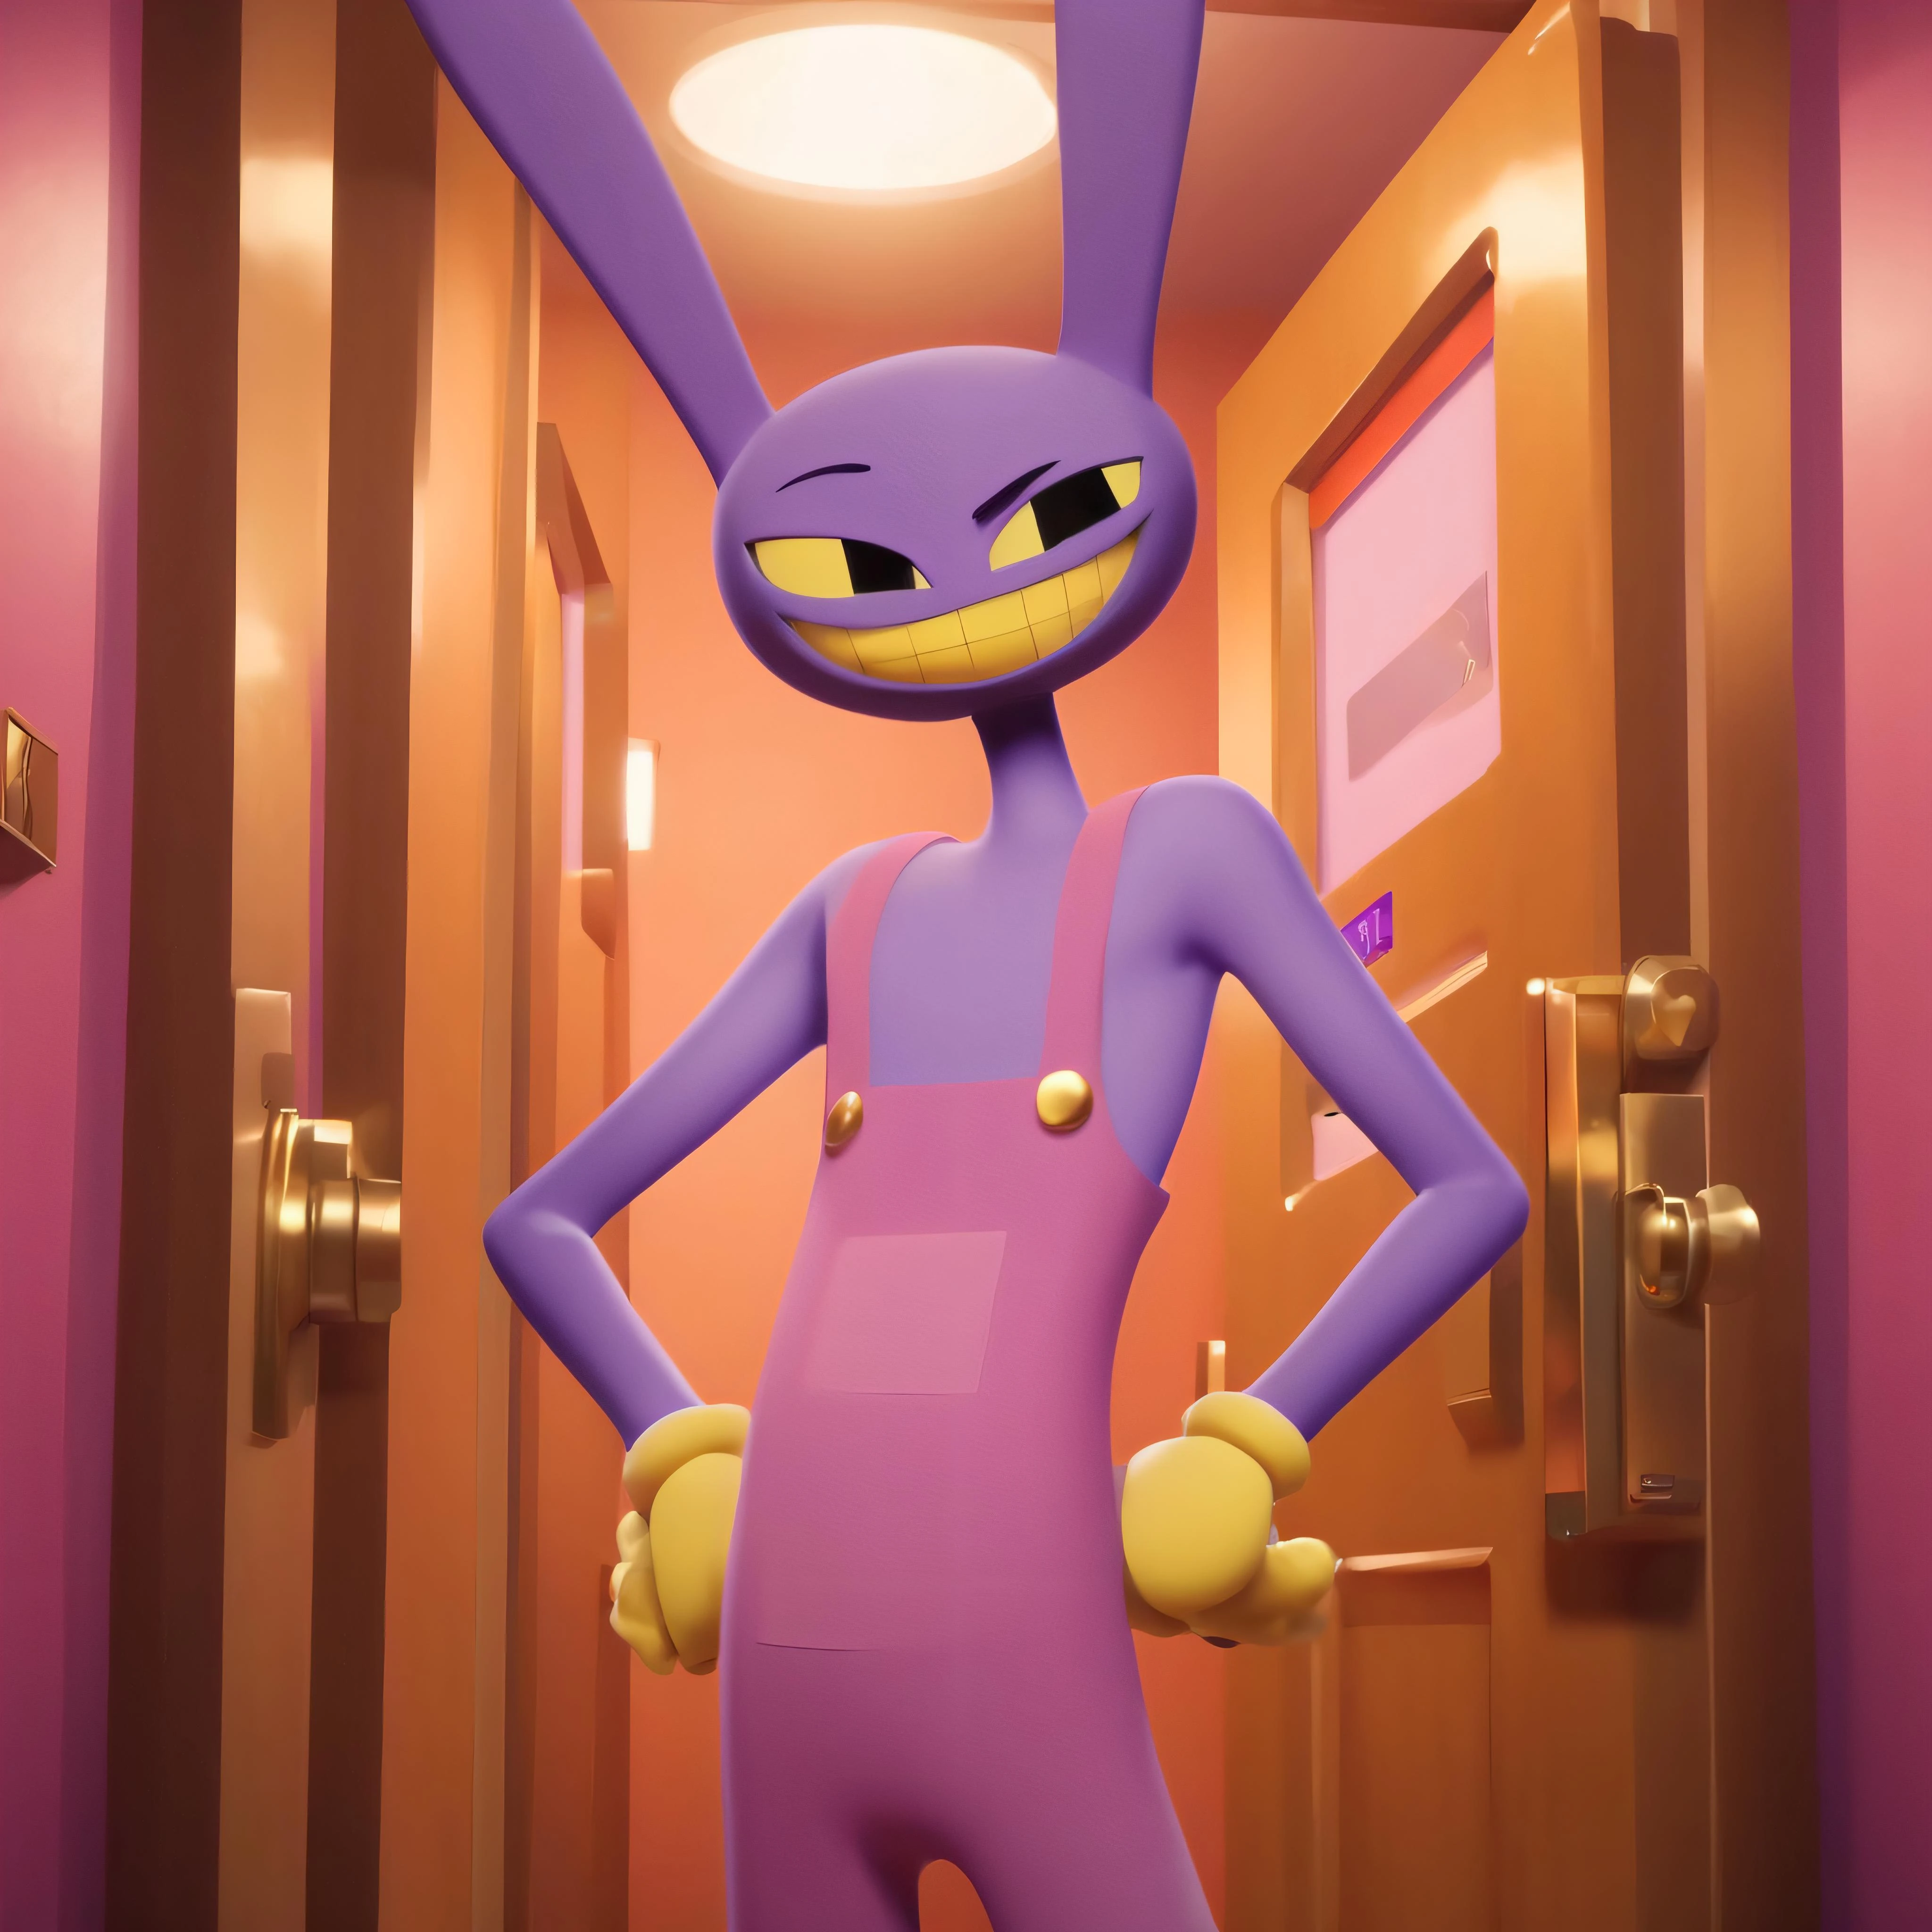 anime artwork  JaxAmazing , bunny man , purple fur , yellow gloves, purple overalls, naked overalls , 2d, looking at the camera , emergency exit doors background , anime style . anime style, key visual, vibrant, studio anime,  highly detailed